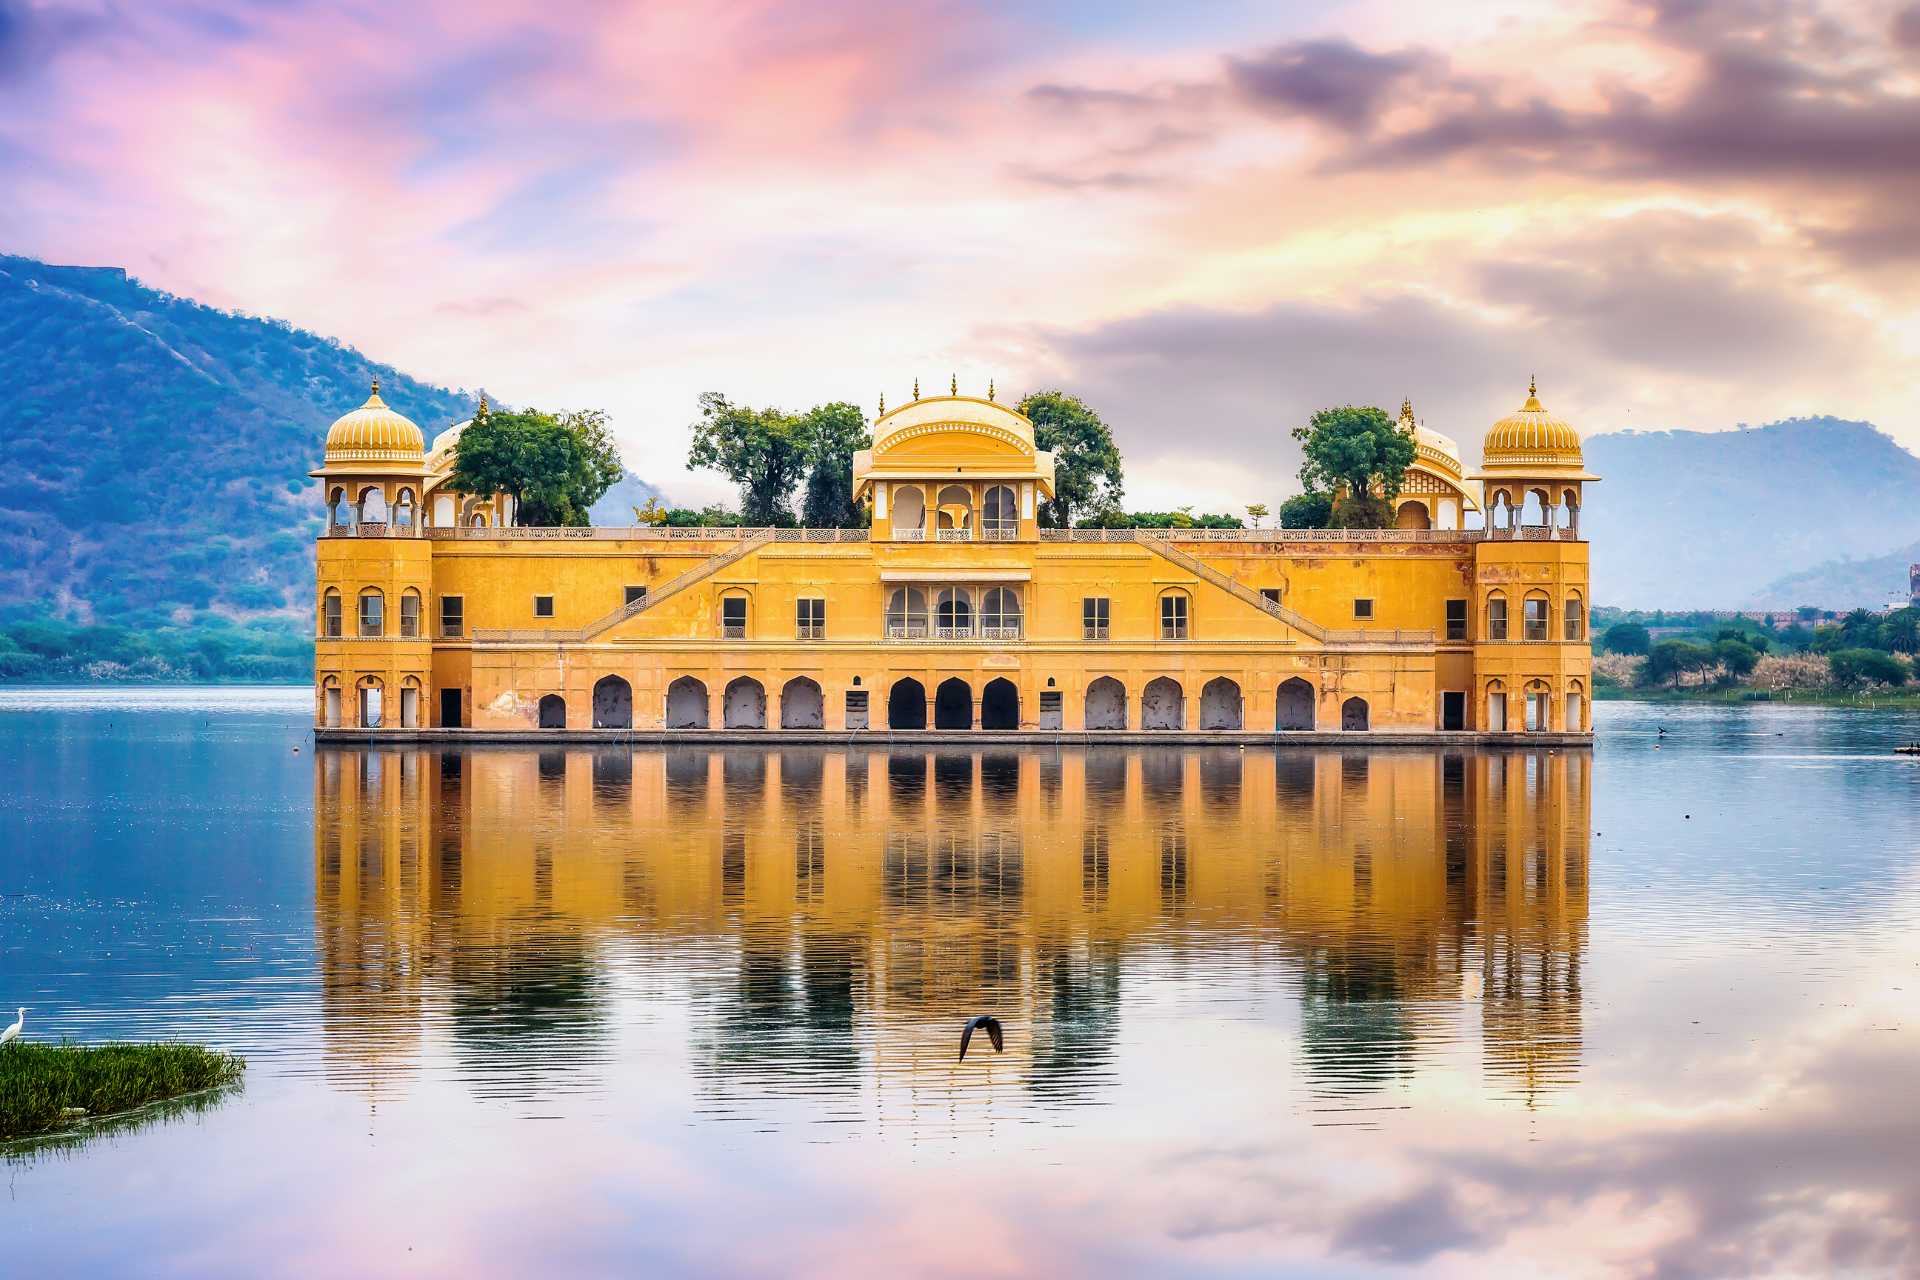 Jal Mahal water palace Jaipur Rajasthan with landscape at sunset ©Getty Images